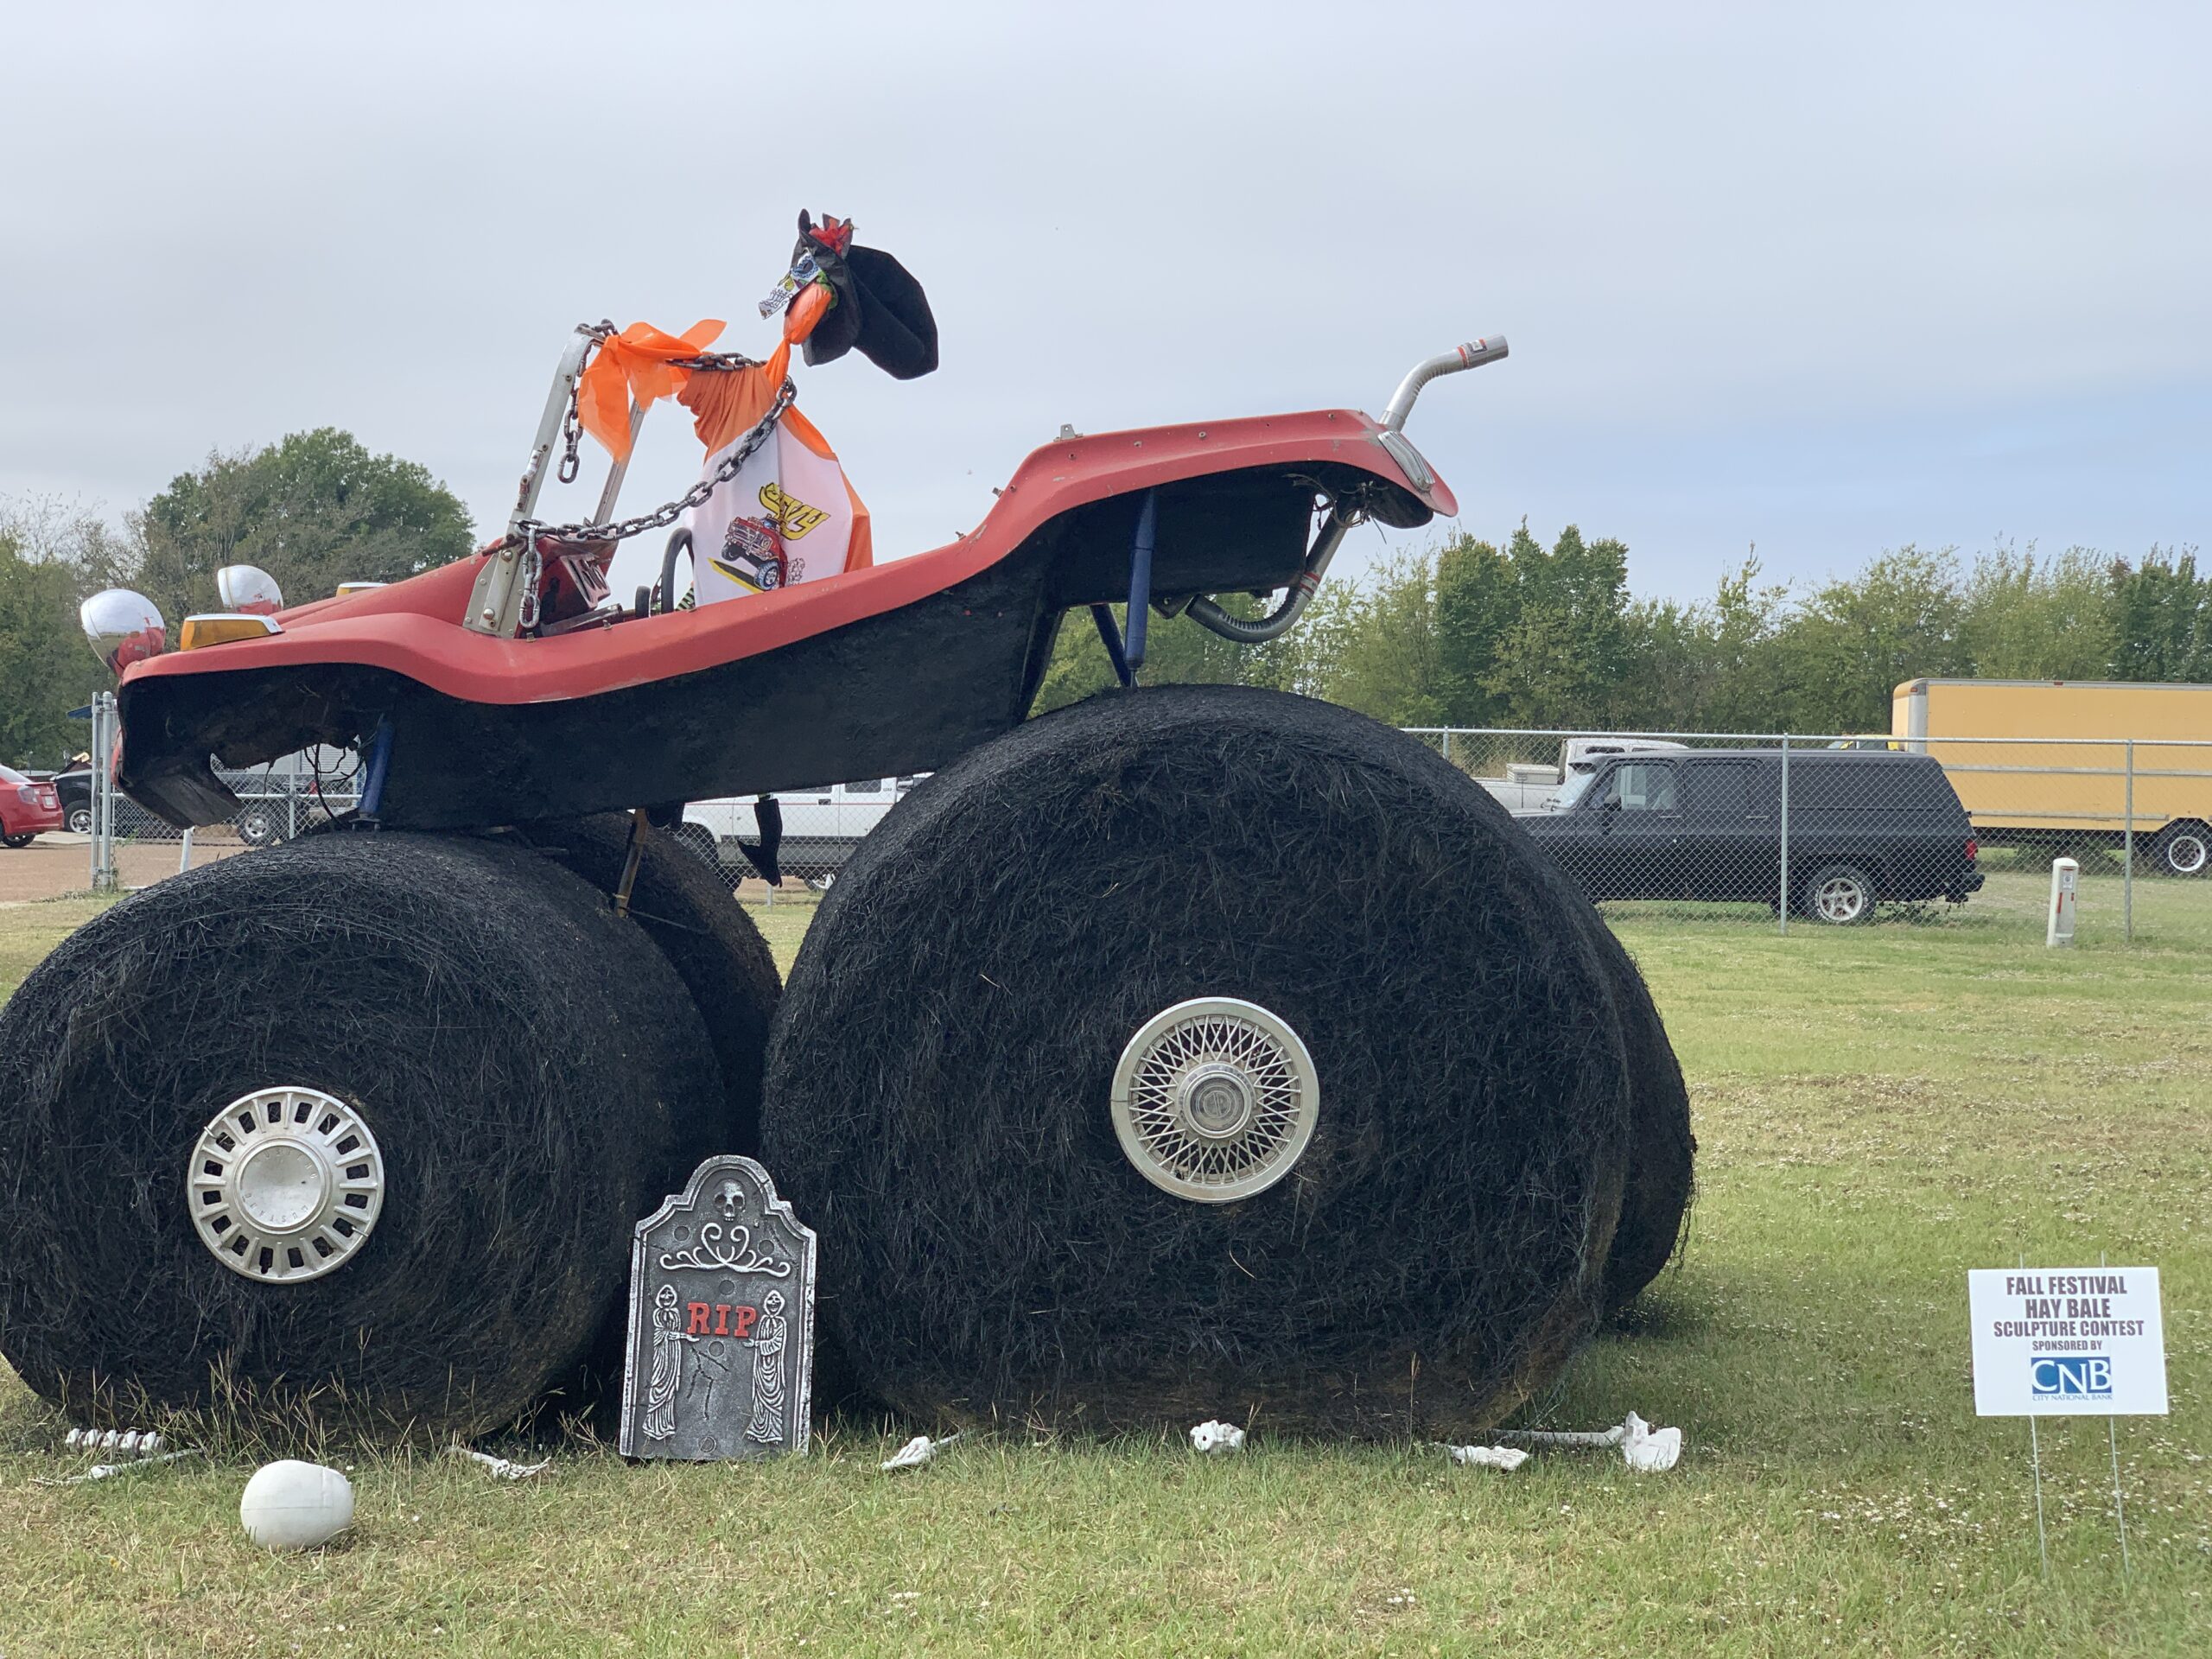 Winners of 2020 Hopkins County Fall Festival Hay Bale Sculpture Contest Announced on Saturday